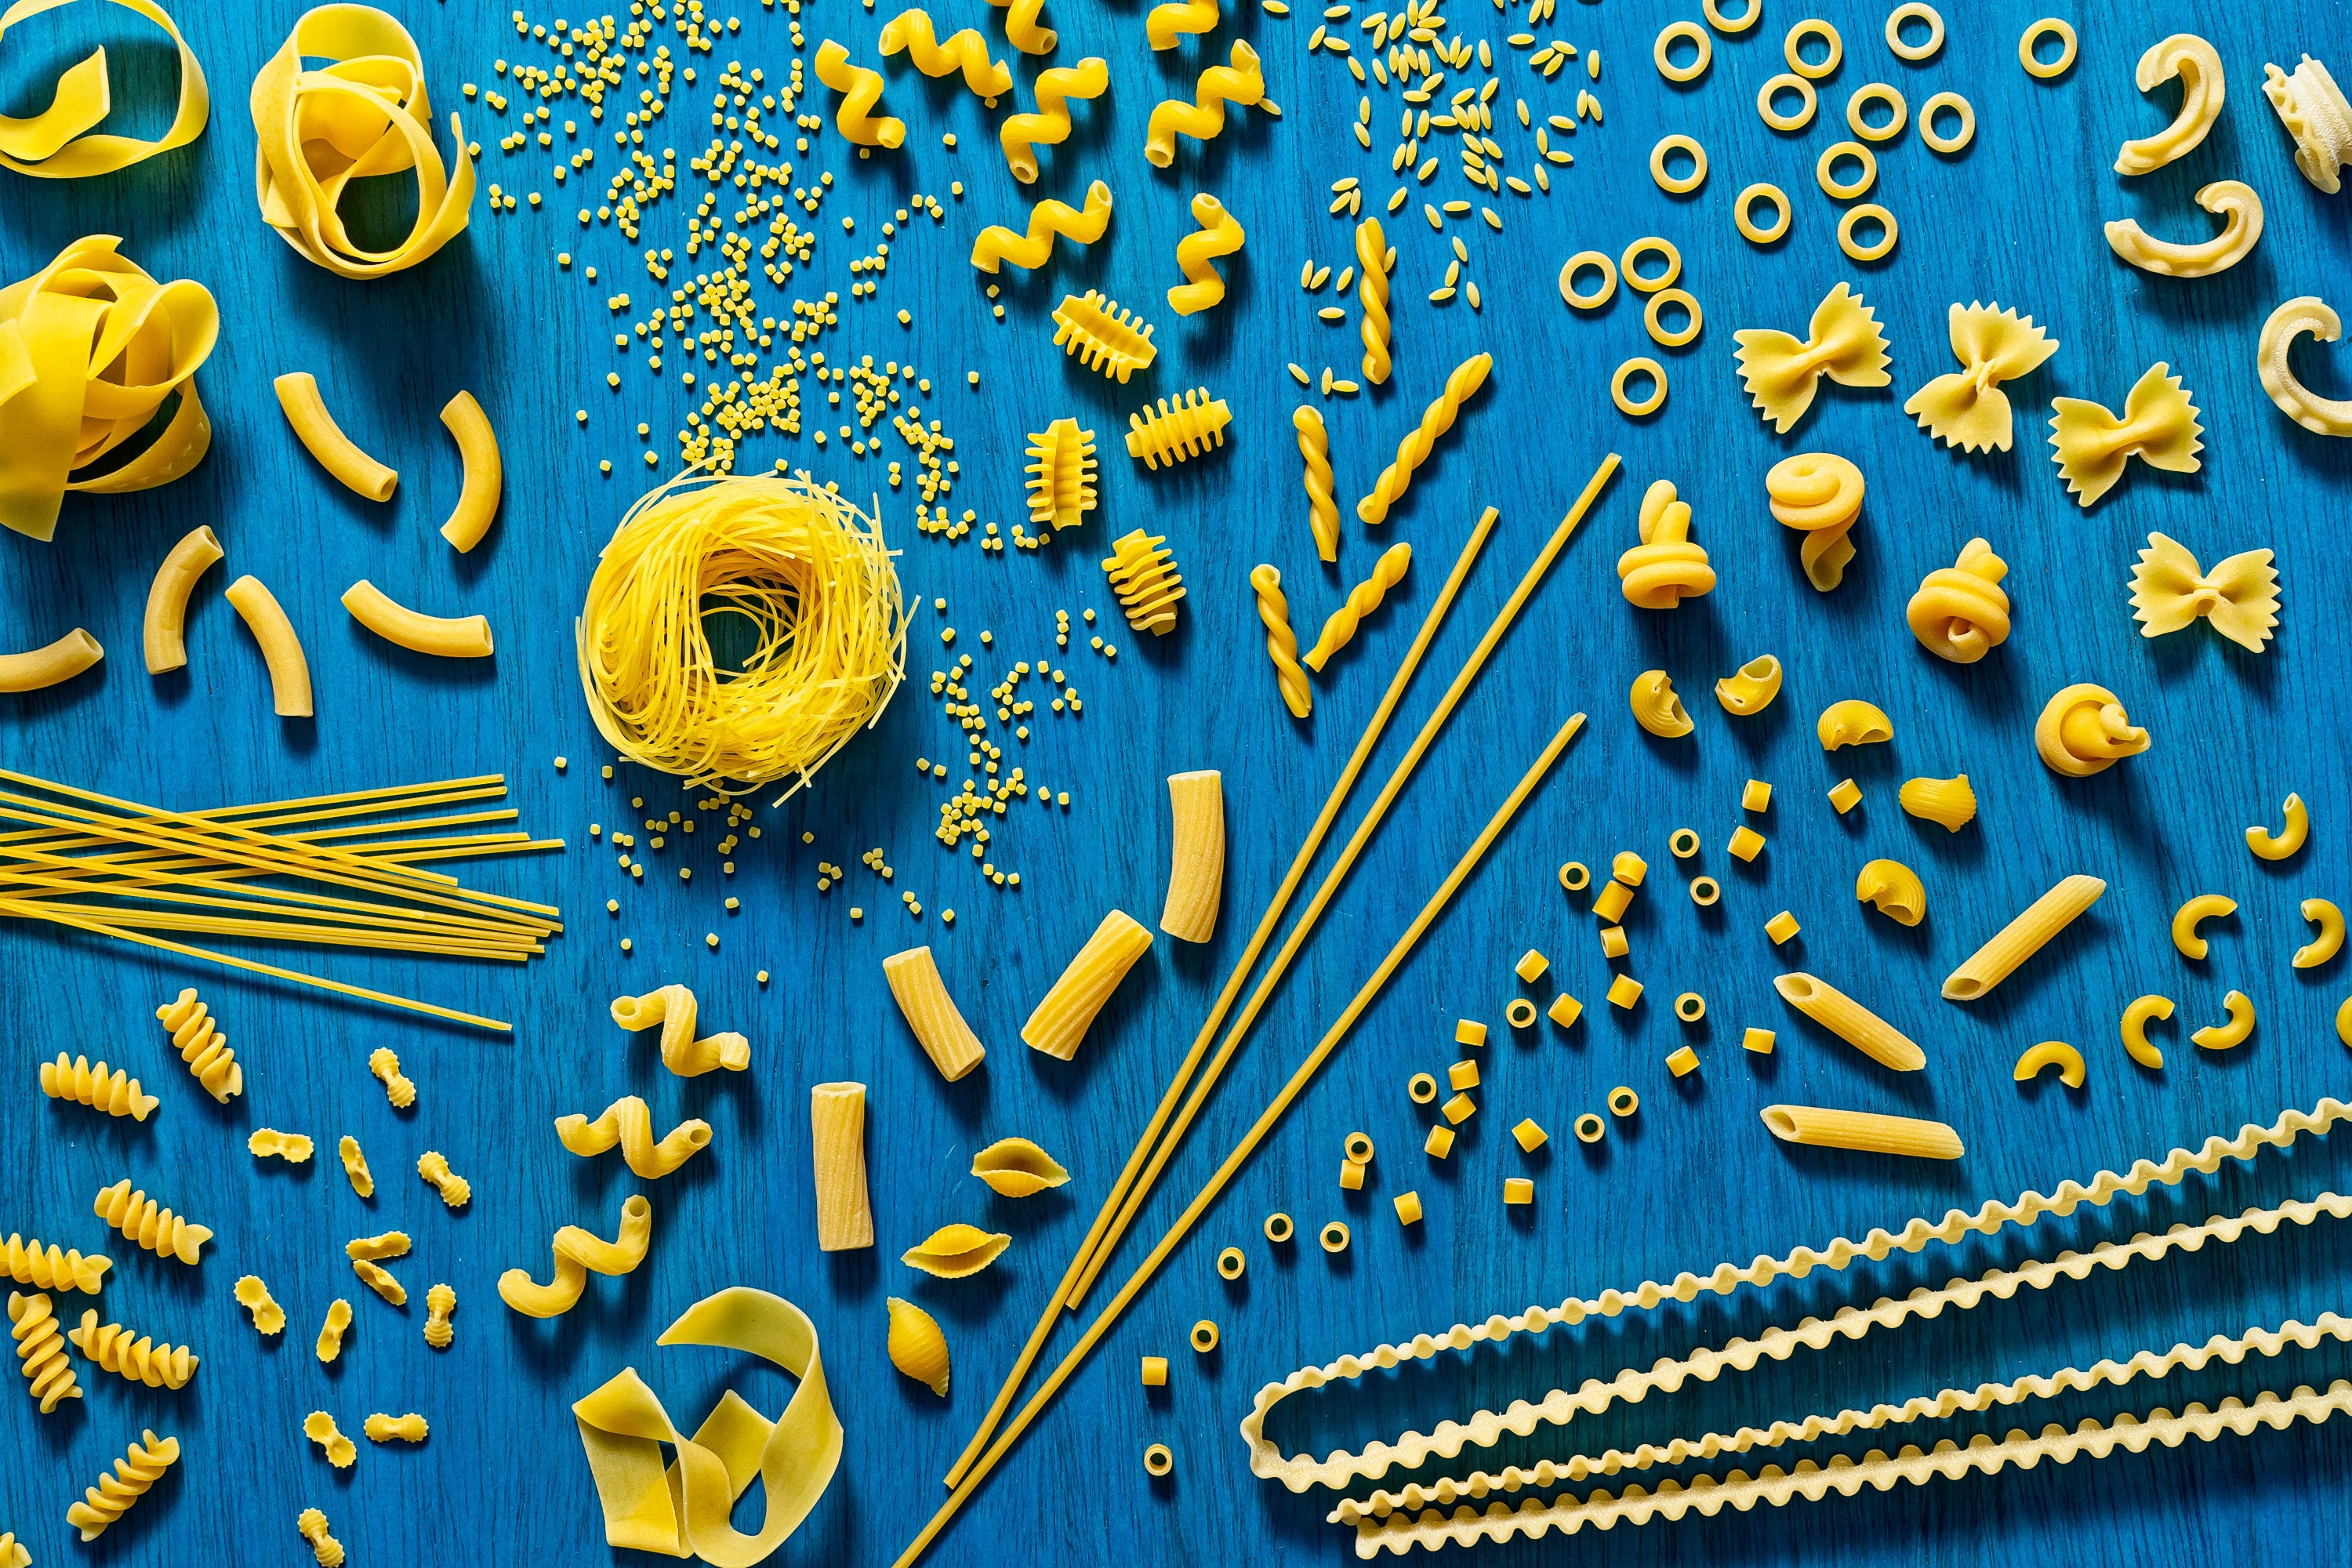 15 Types of Pasta Shapes - Pasta Names, Shapes and Recipes to Try